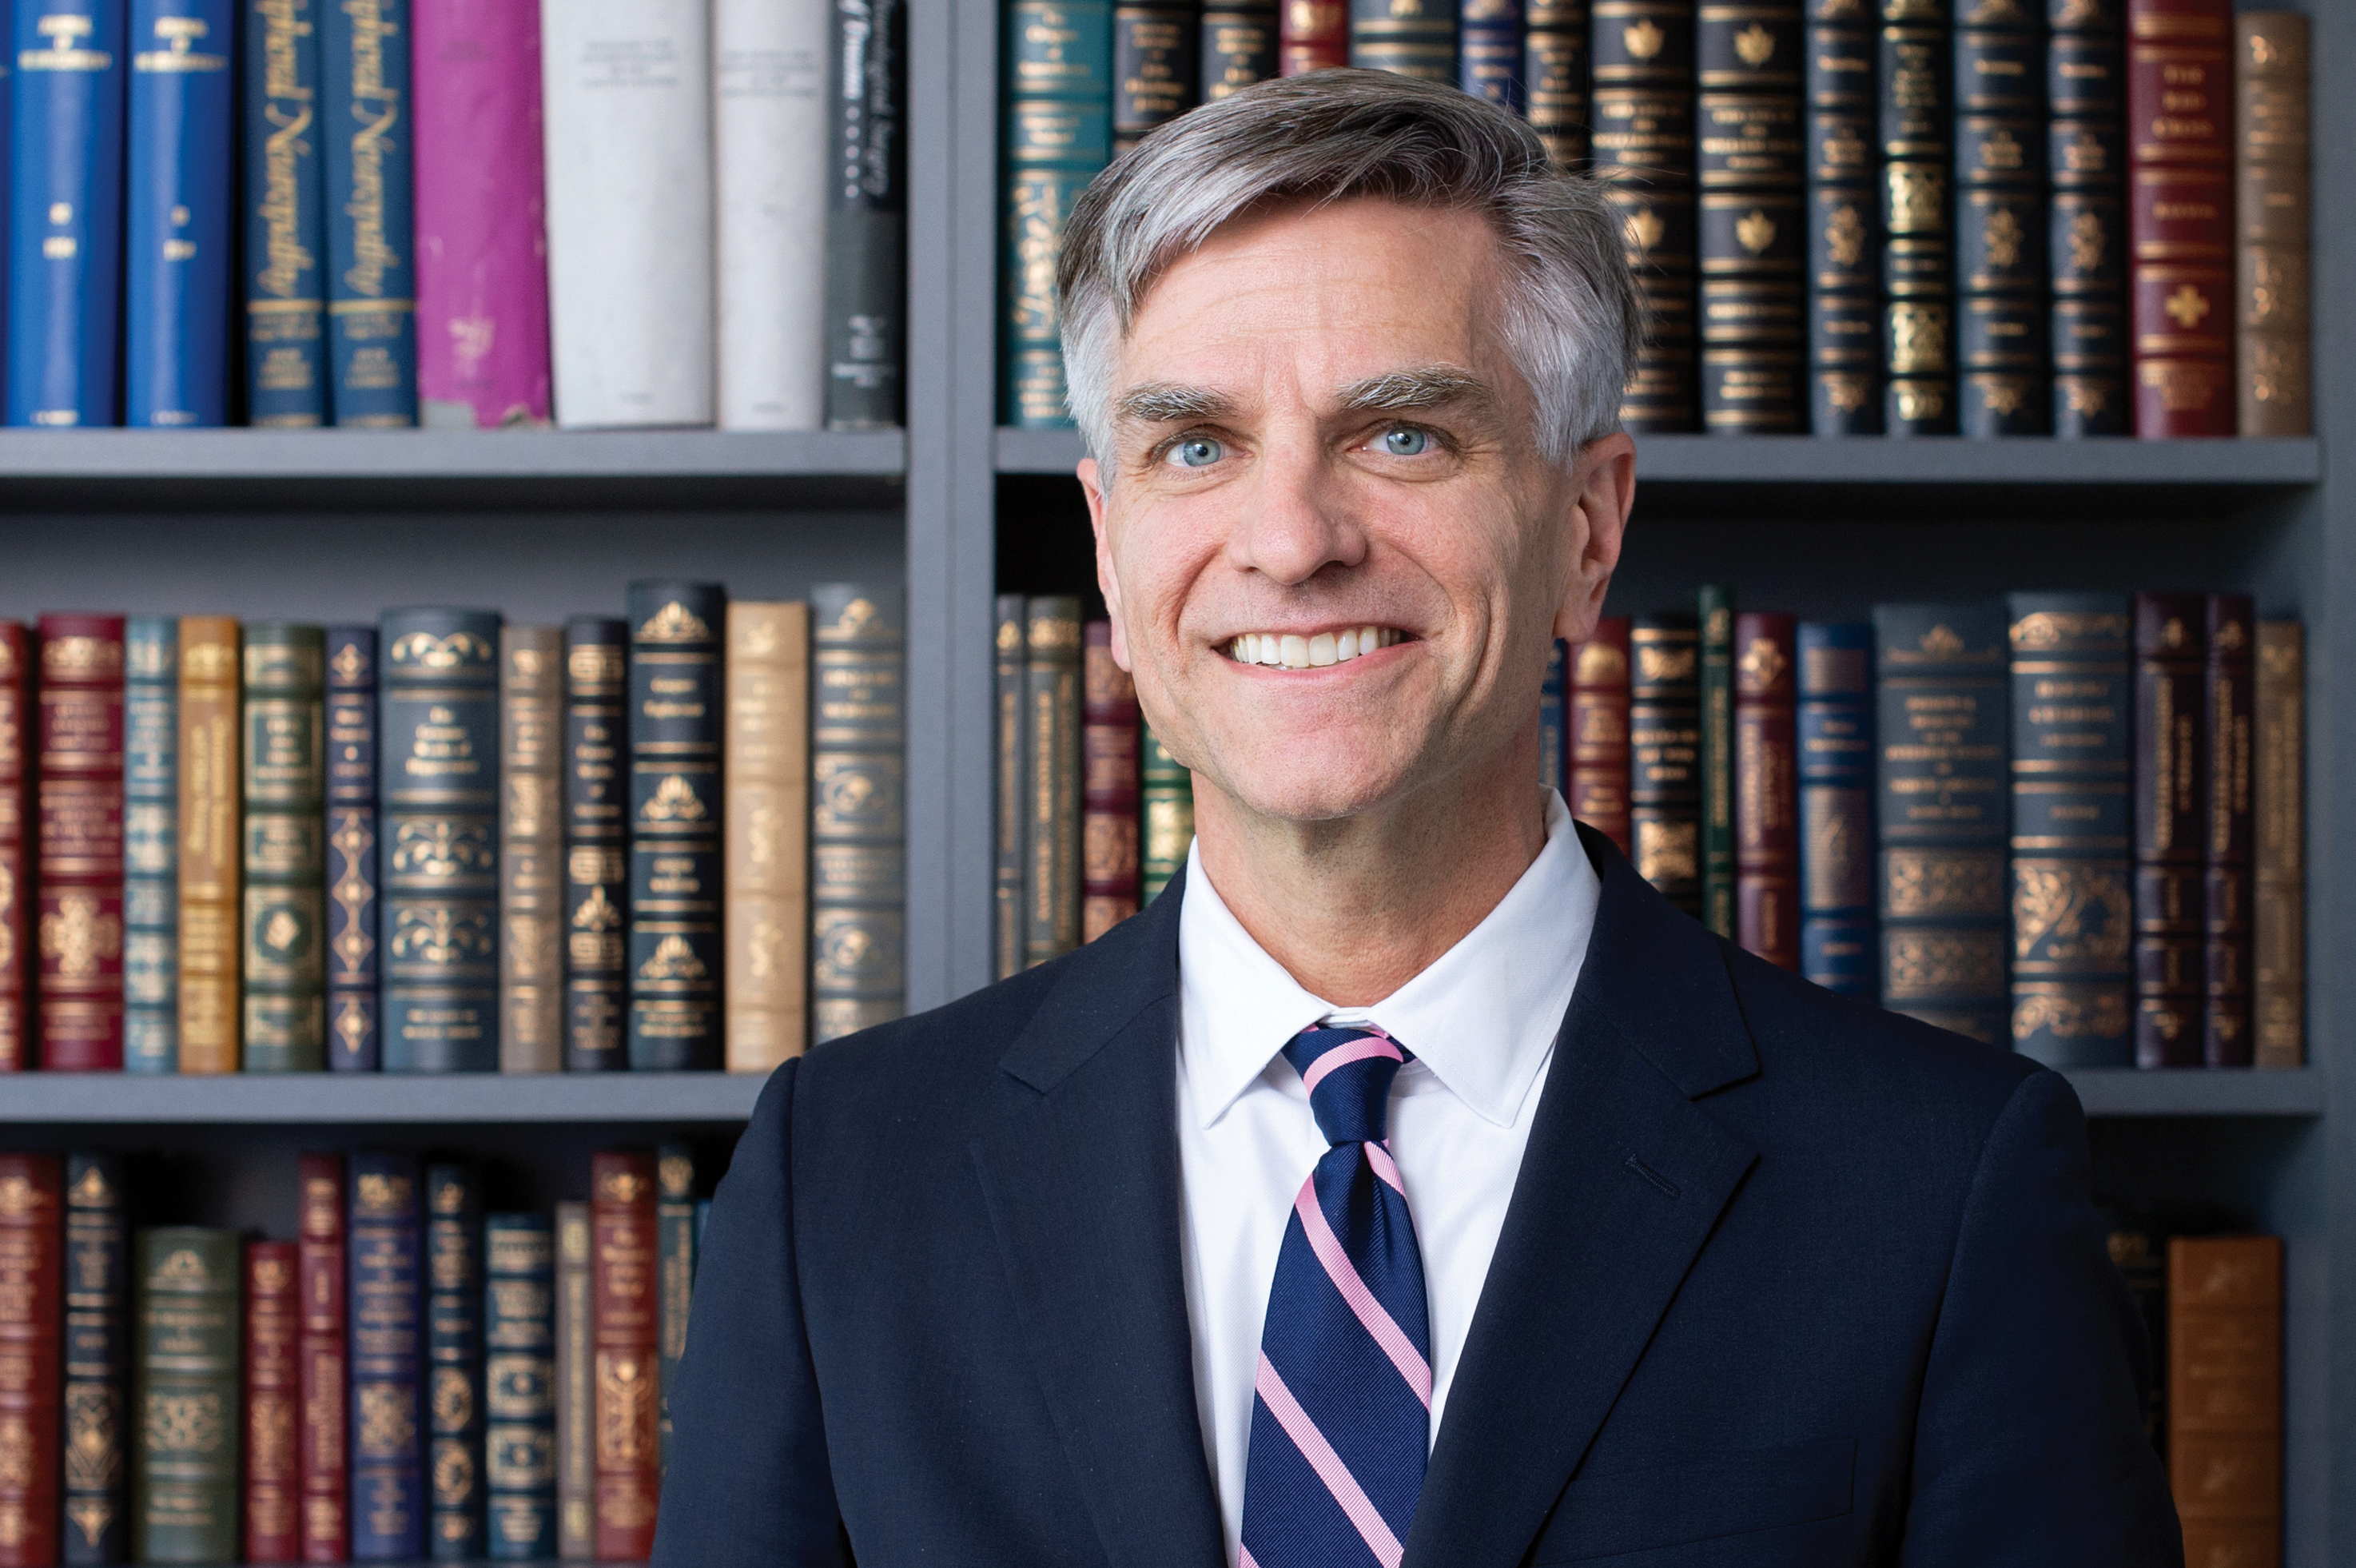 Environmental headshot of Dr. James Markert, MD (Professor and Chair, Neurosurgery) in his office, 2020.